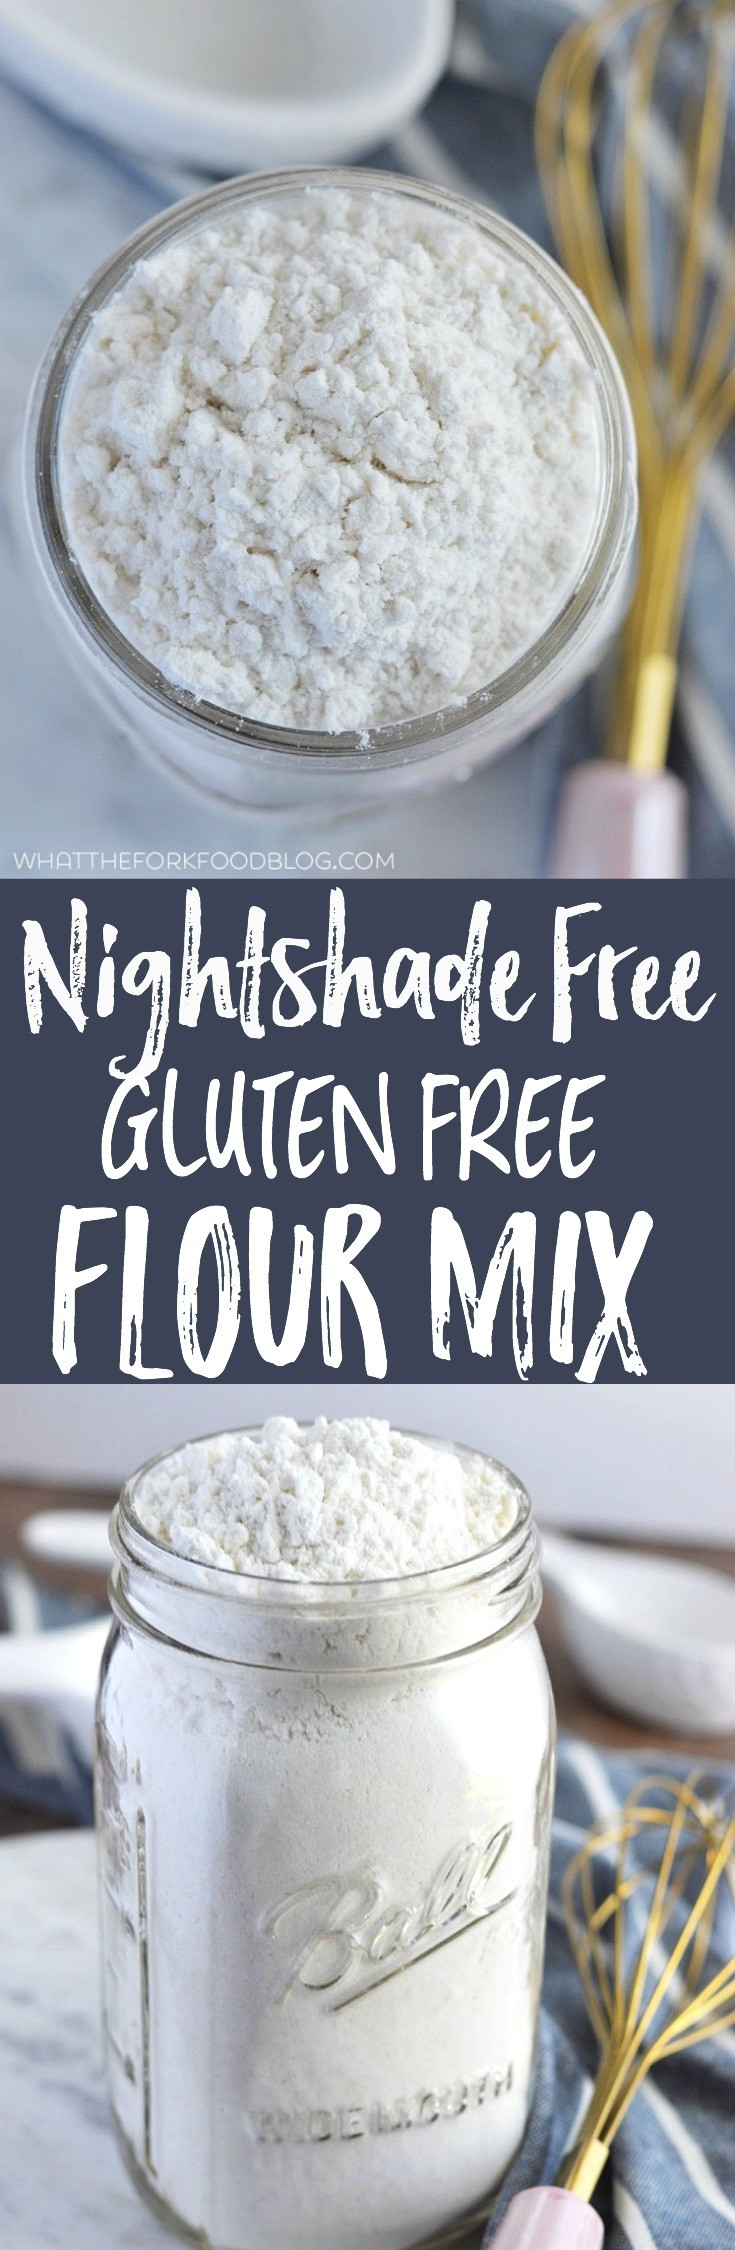 Nightshade-Free Gluten Free Flour Mix from What The Fork Food Blog | whattheforkfoodblog.com